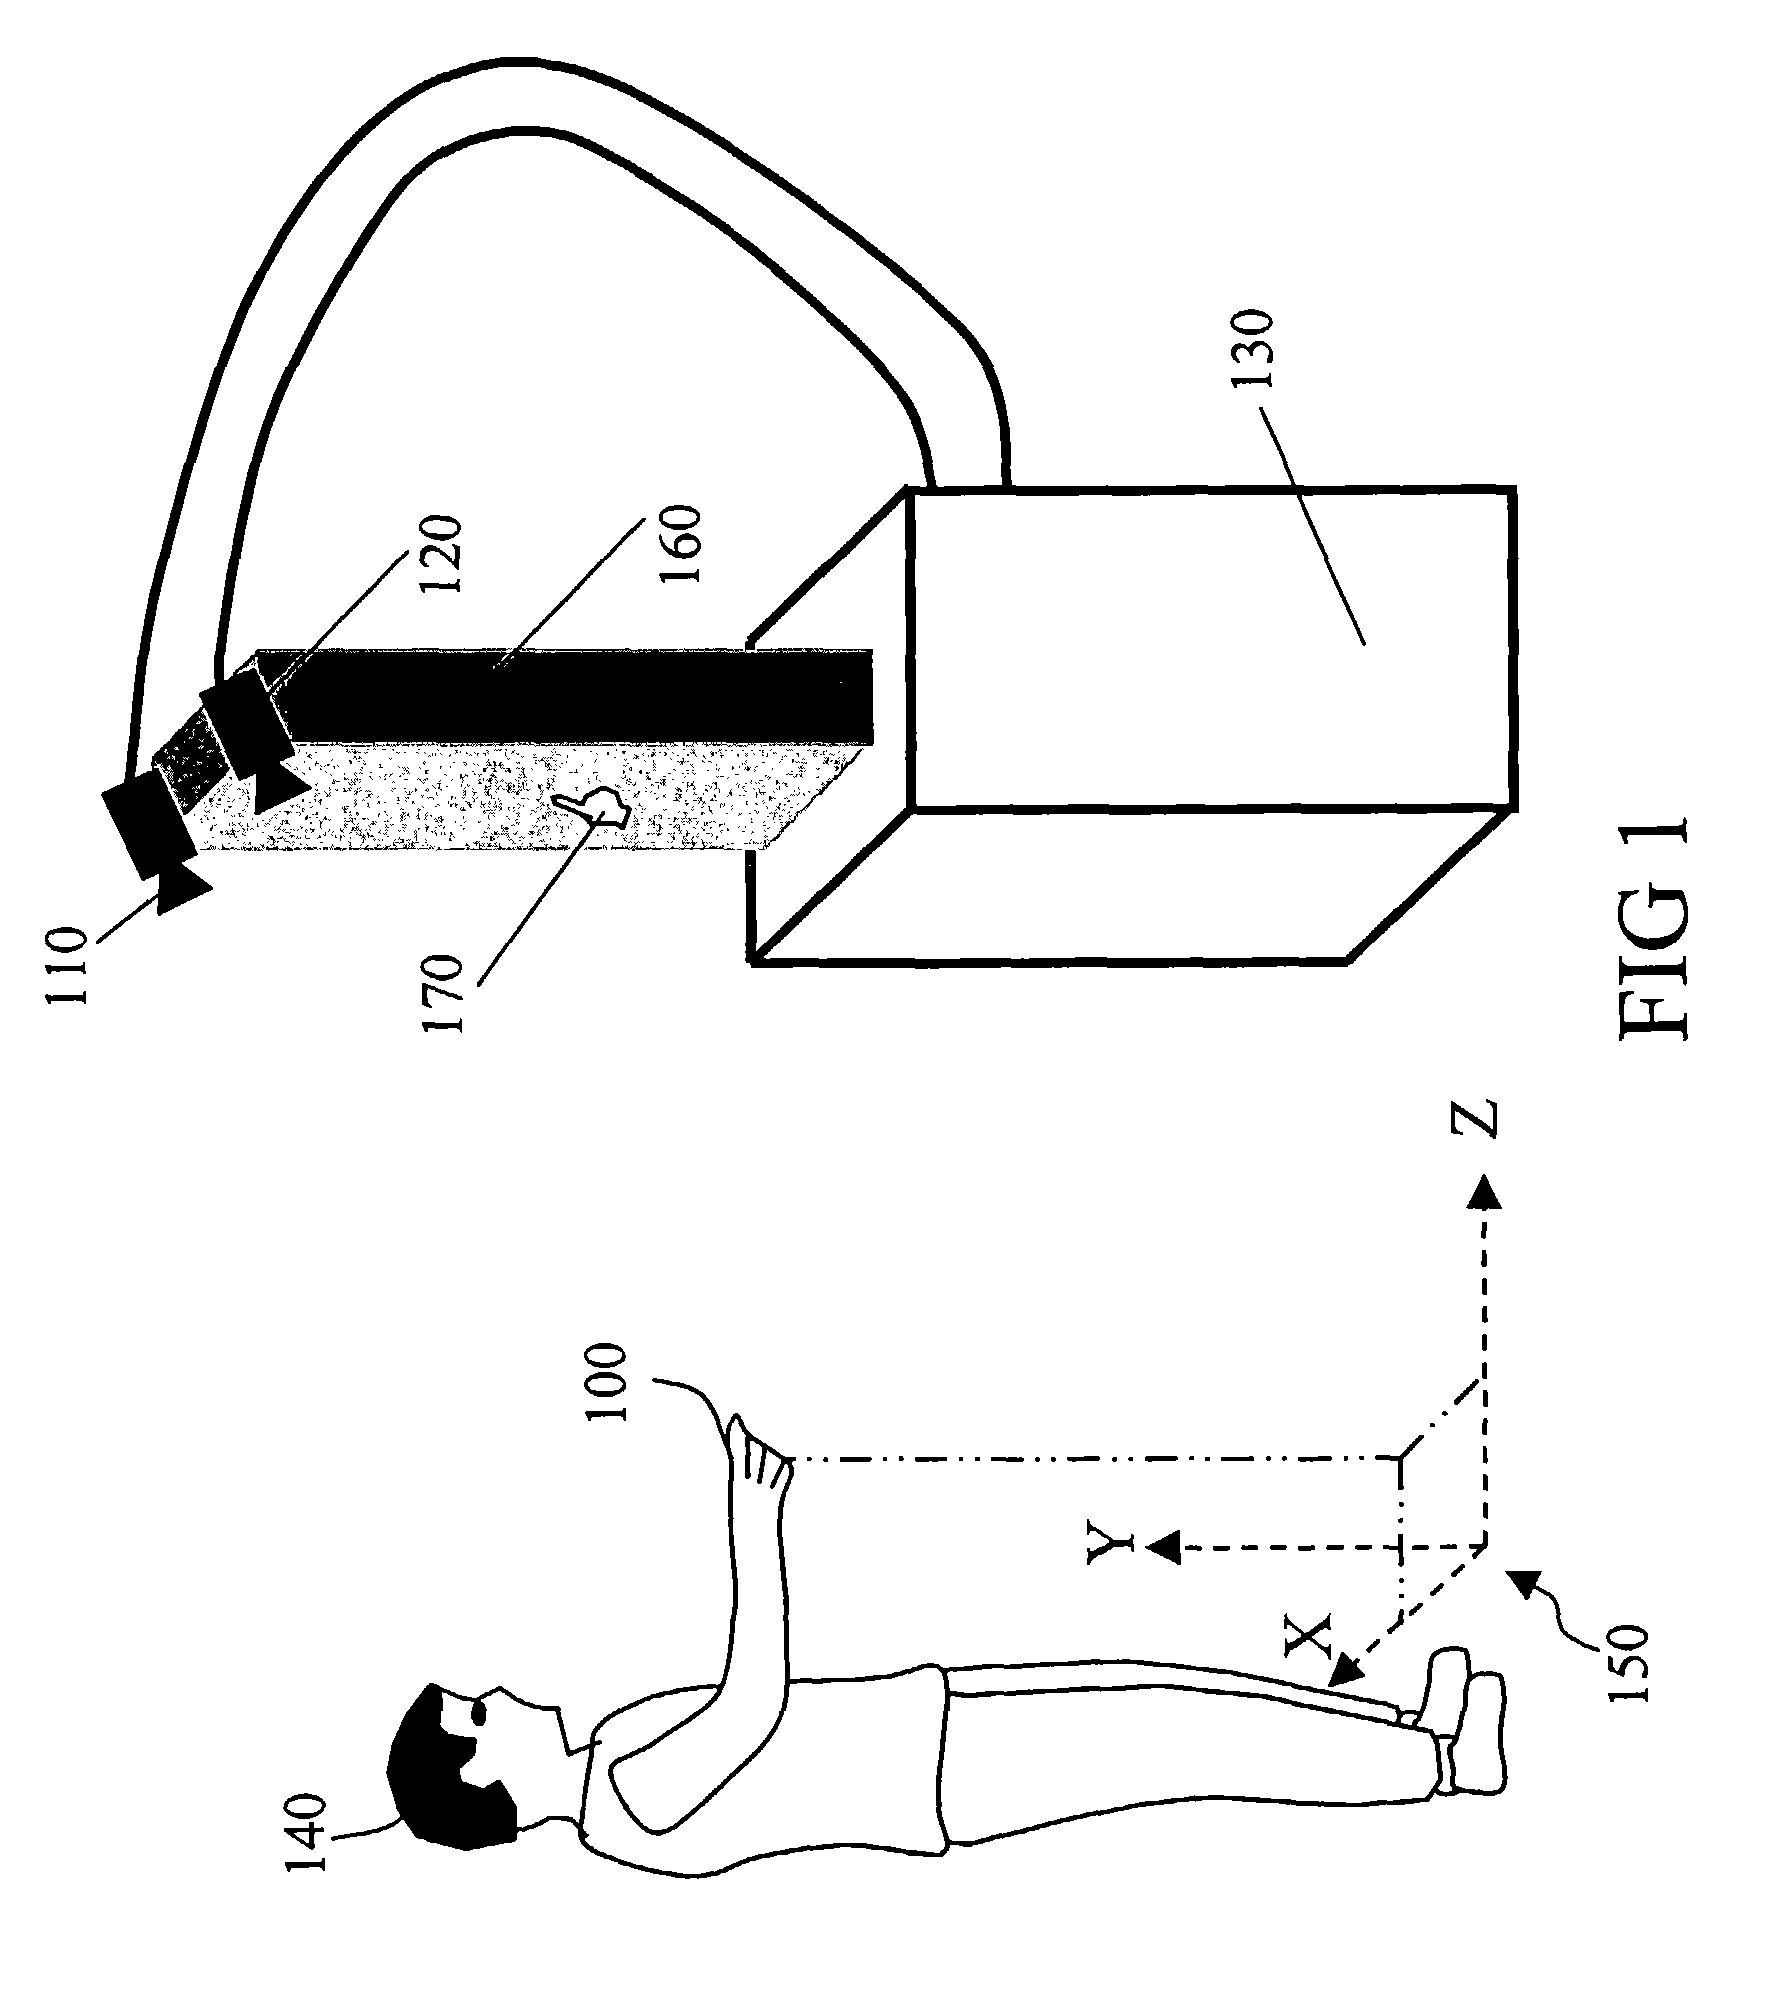 Method and apparatus for robustly tracking objects